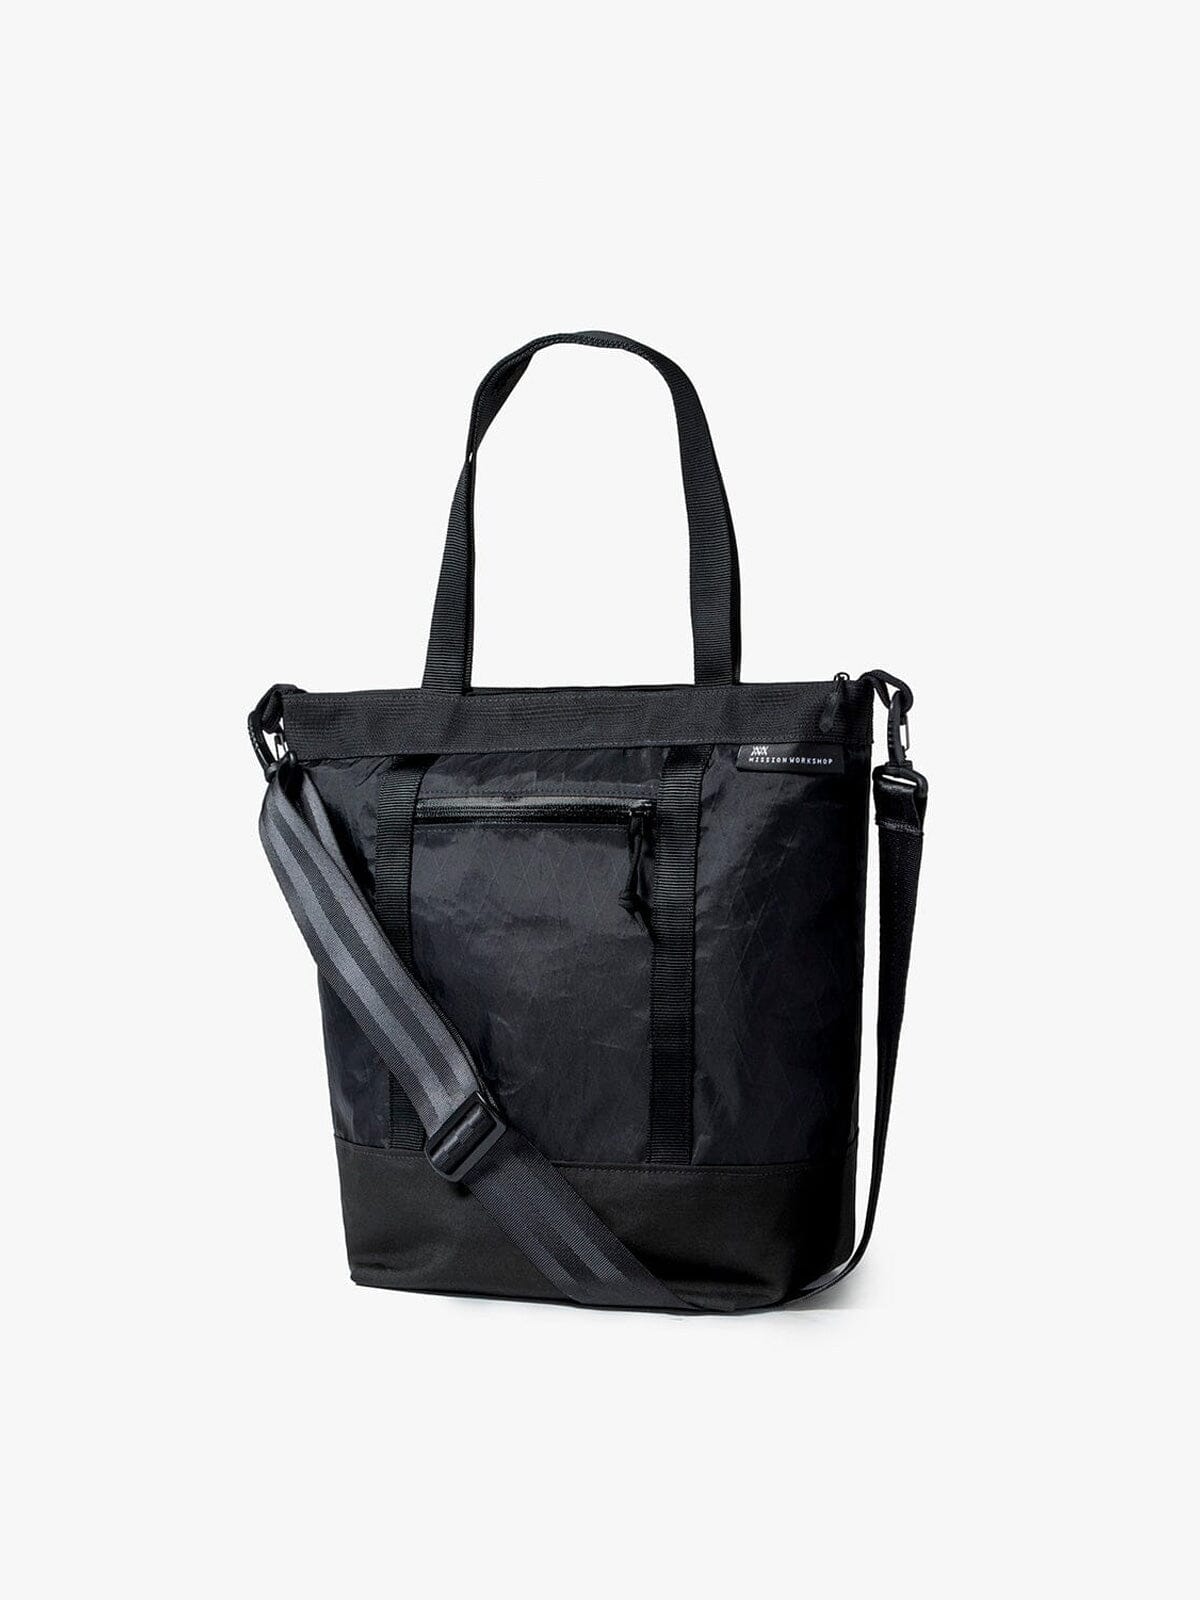 Helix 10L Tote by Mission Workshop - Weatherproof Bags & Technical Apparel - San Francisco & Los Angeles - Built to endure - Guaranteed forever